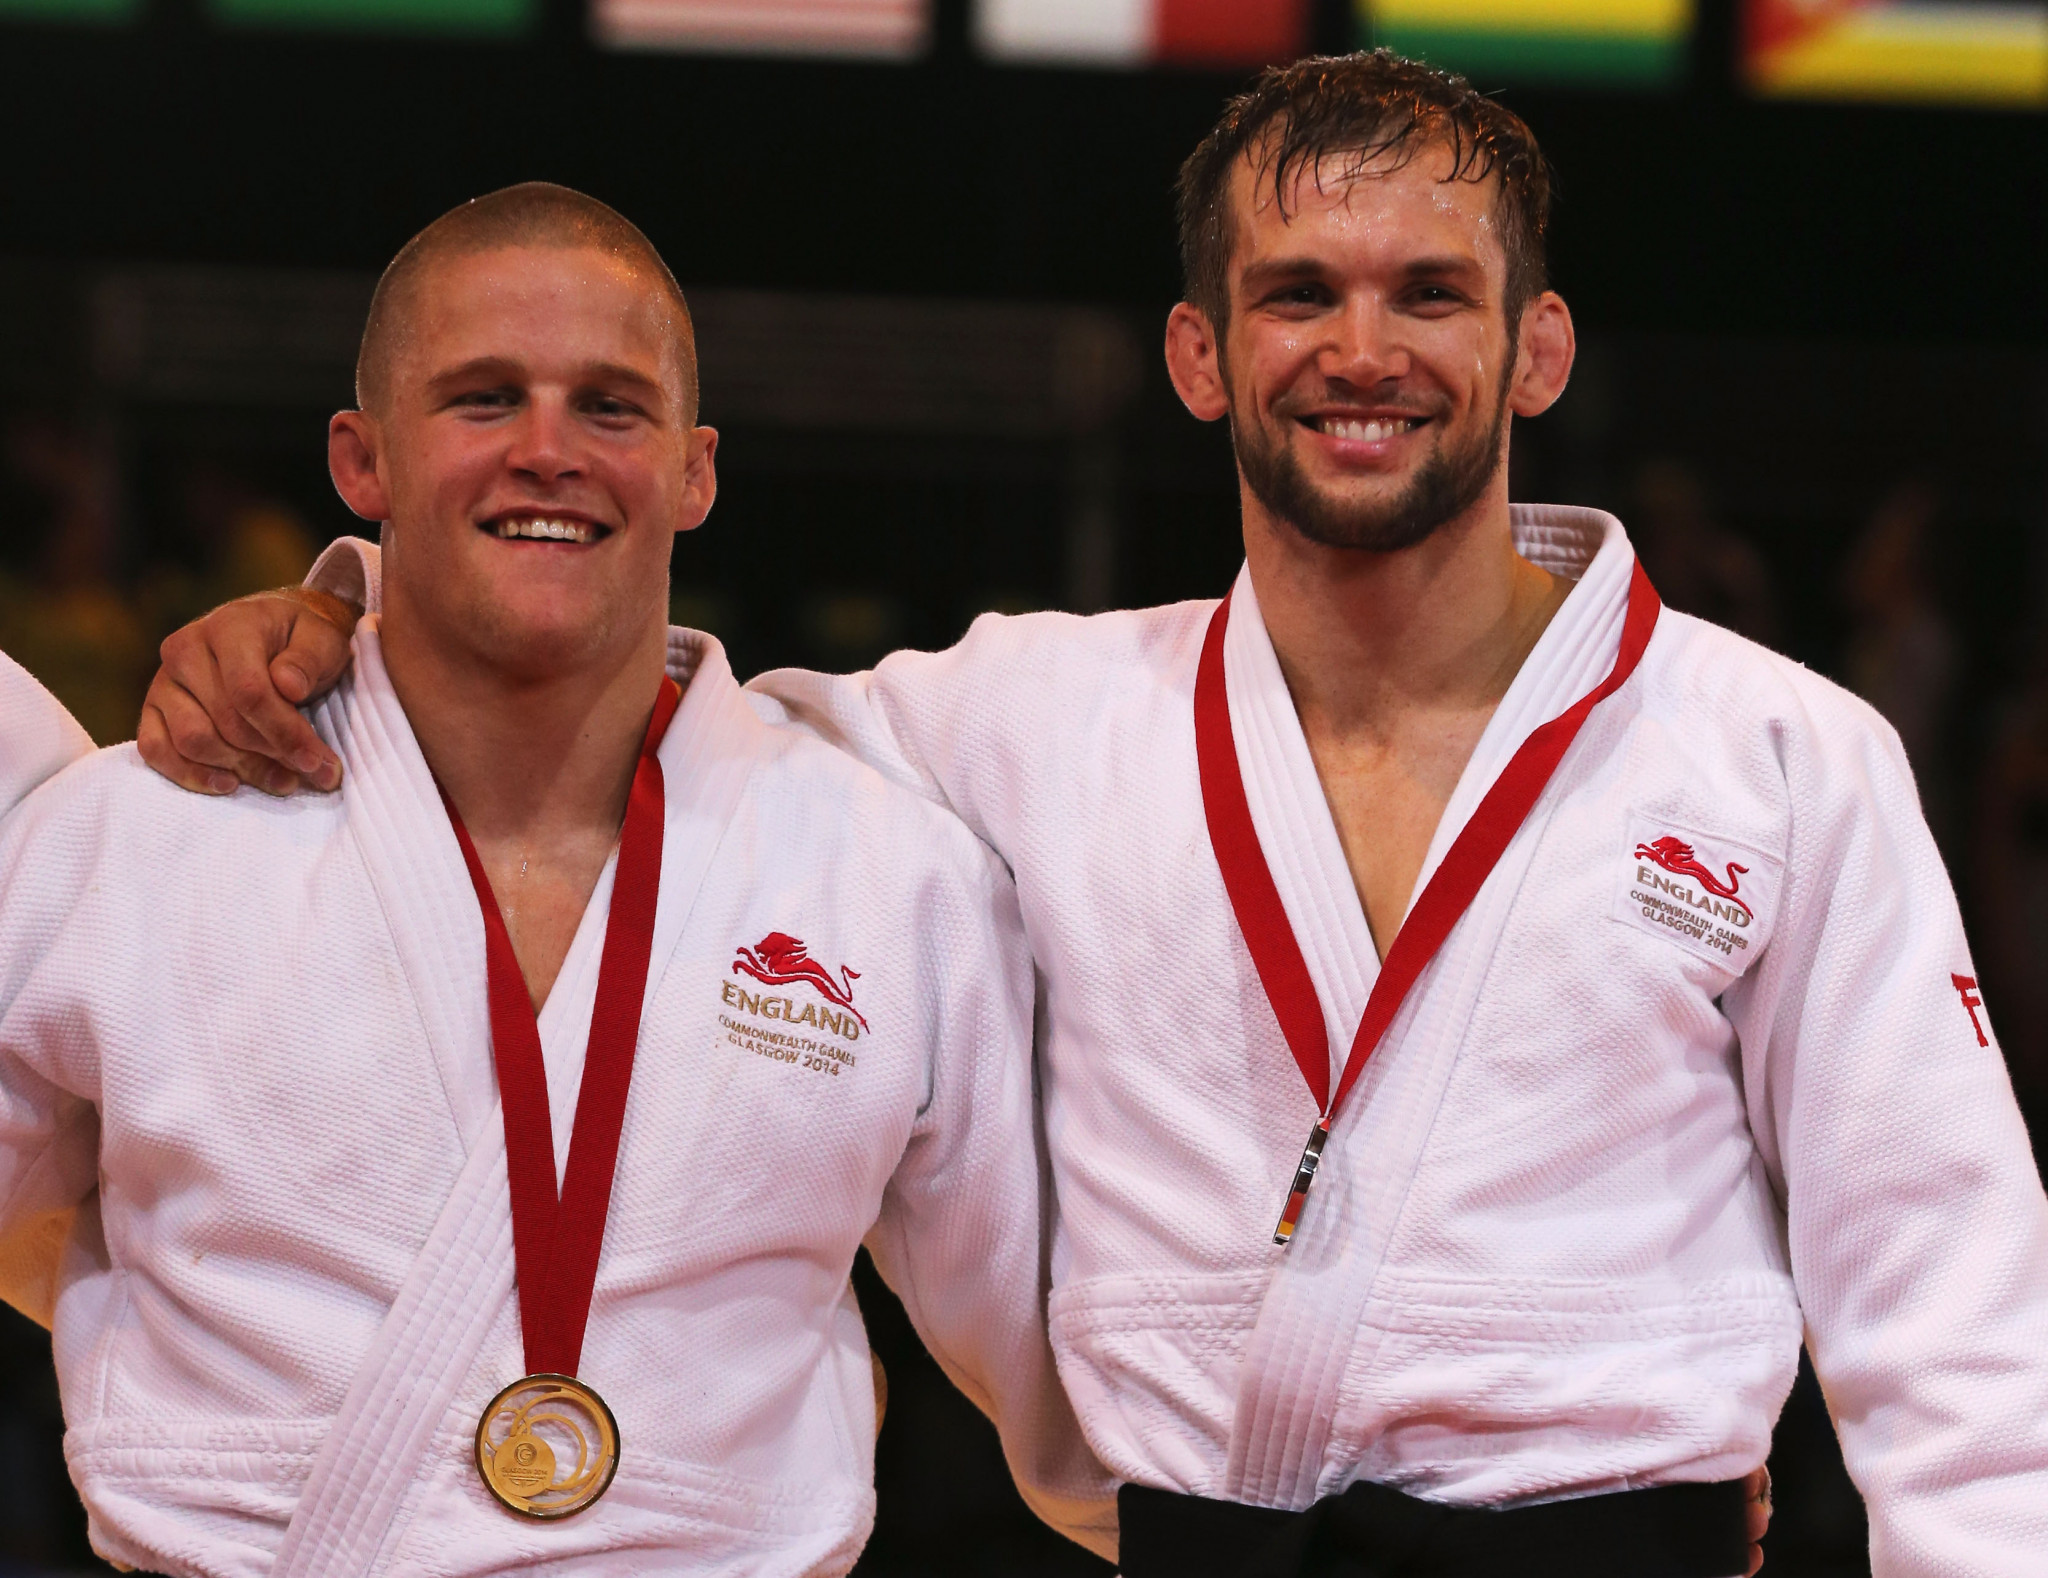 English judoka Owen Livesey, left, and Tom Reed, with their respective gold and silver medals at the Glasgow 2014 Commonwealth Games ©Getty Images